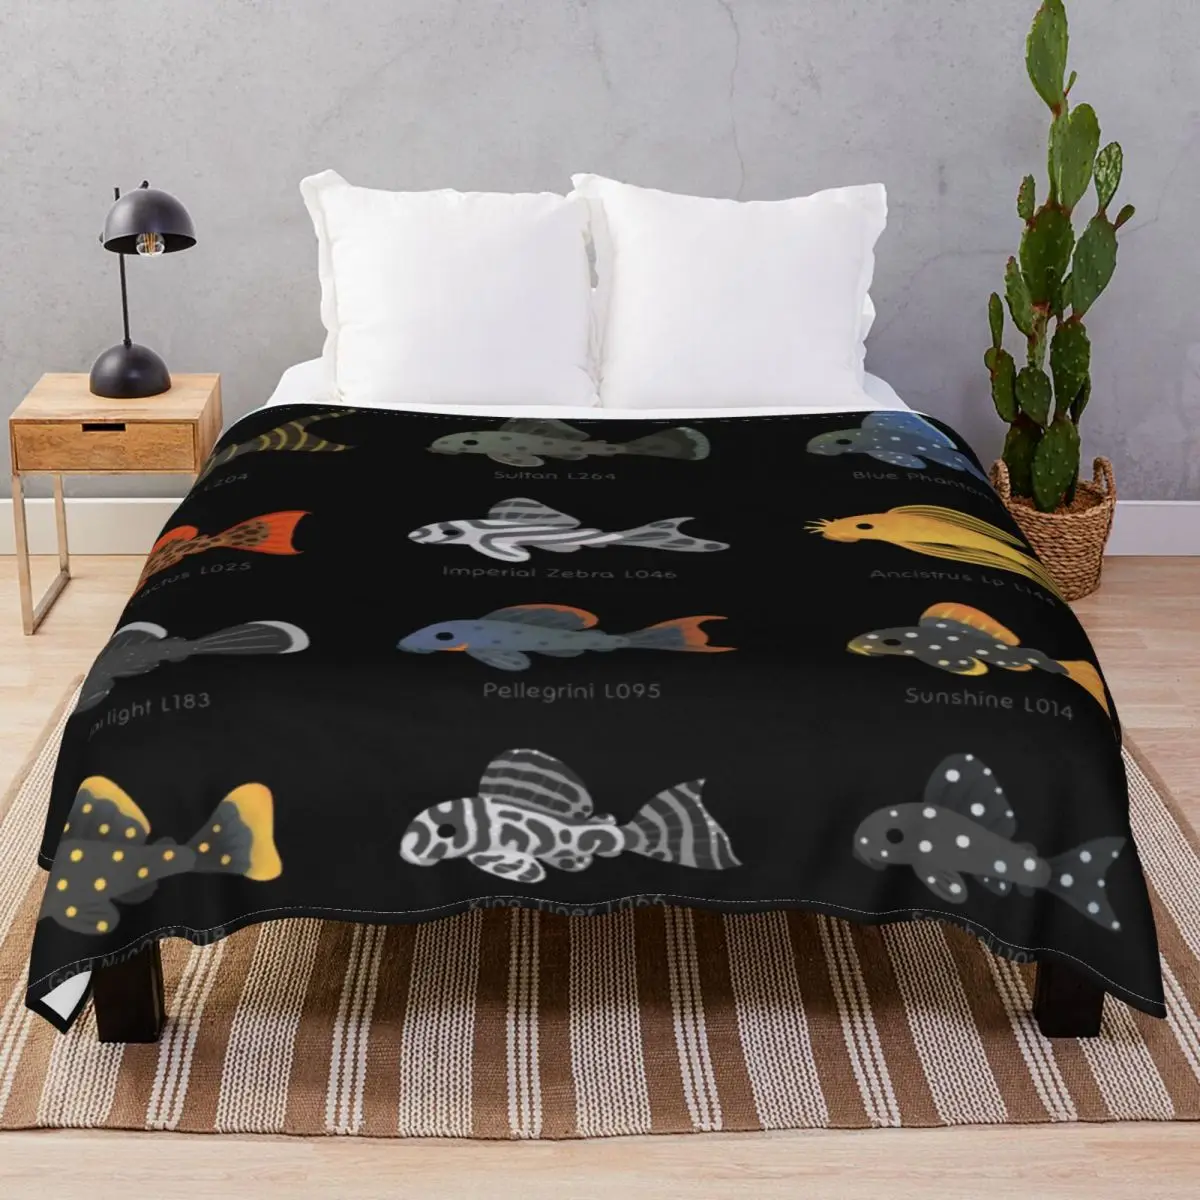 Pleco Black Blankets Flannel Summer Warm Throw Blanket for Bedding Home Couch Camp Office